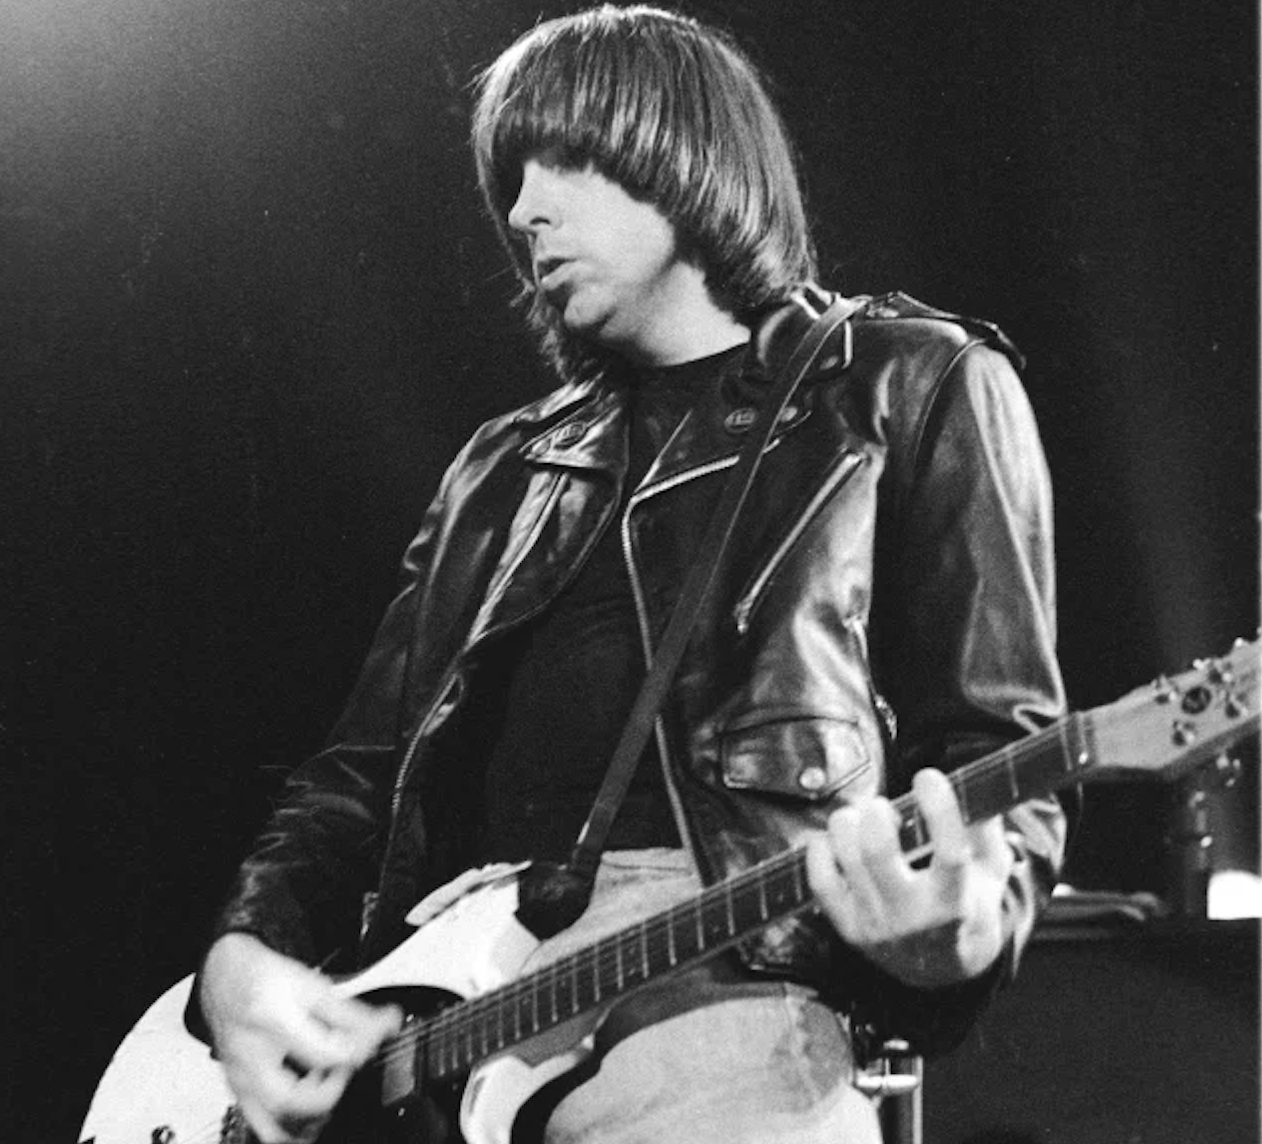 Johnny Ramone's guitar and amp up for auction - Official Merchandise Store